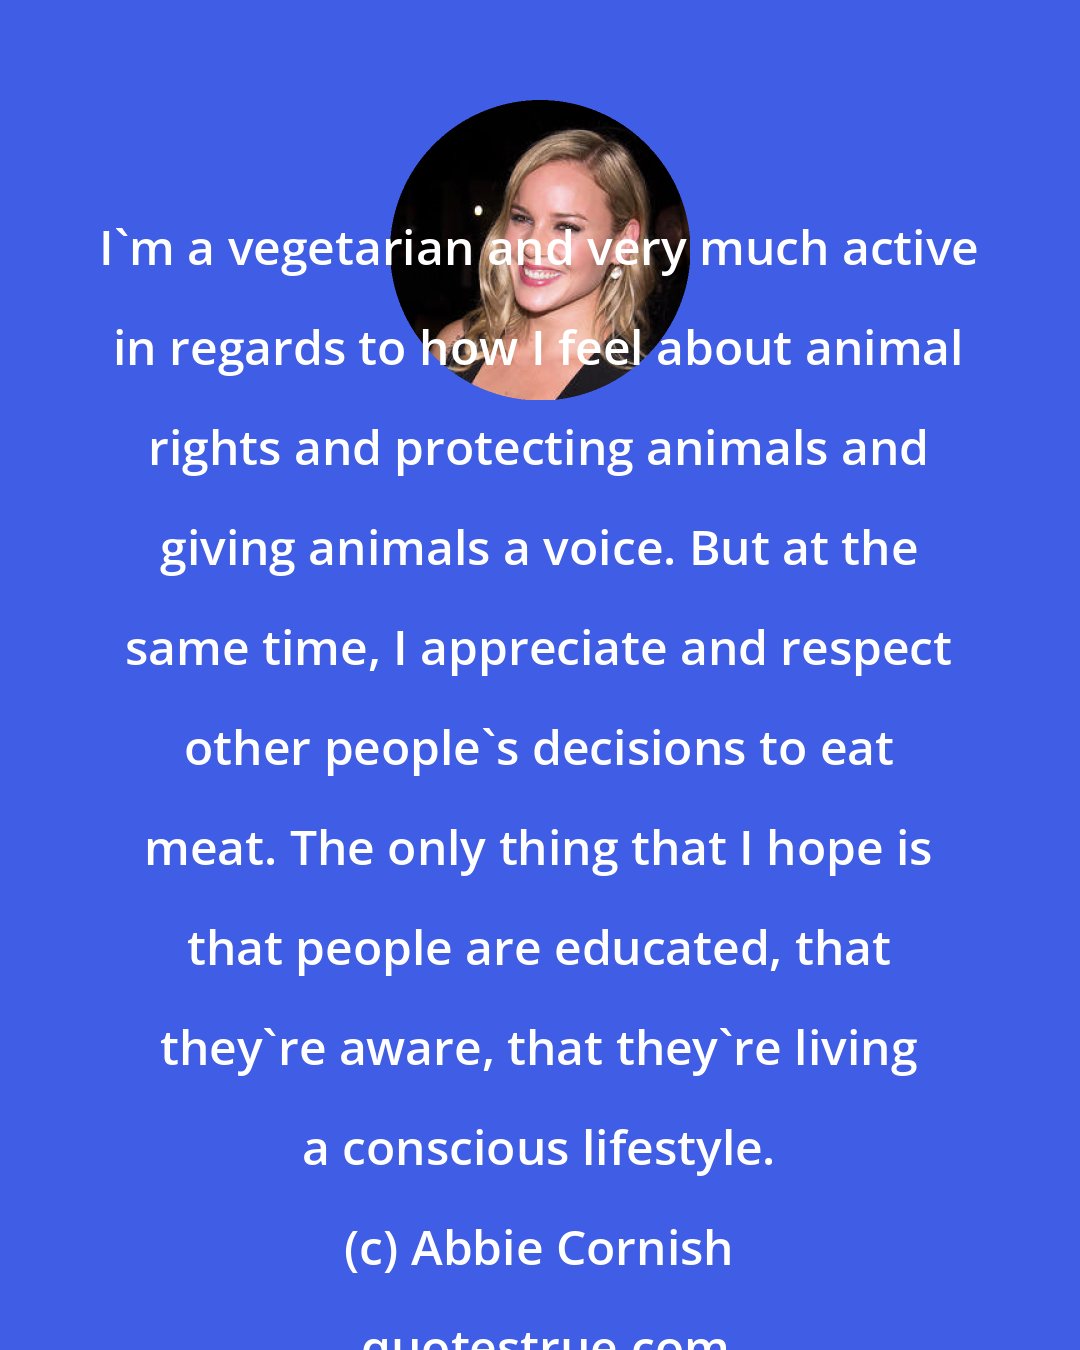 Abbie Cornish: I'm a vegetarian and very much active in regards to how I feel about animal rights and protecting animals and giving animals a voice. But at the same time, I appreciate and respect other people's decisions to eat meat. The only thing that I hope is that people are educated, that they're aware, that they're living a conscious lifestyle.